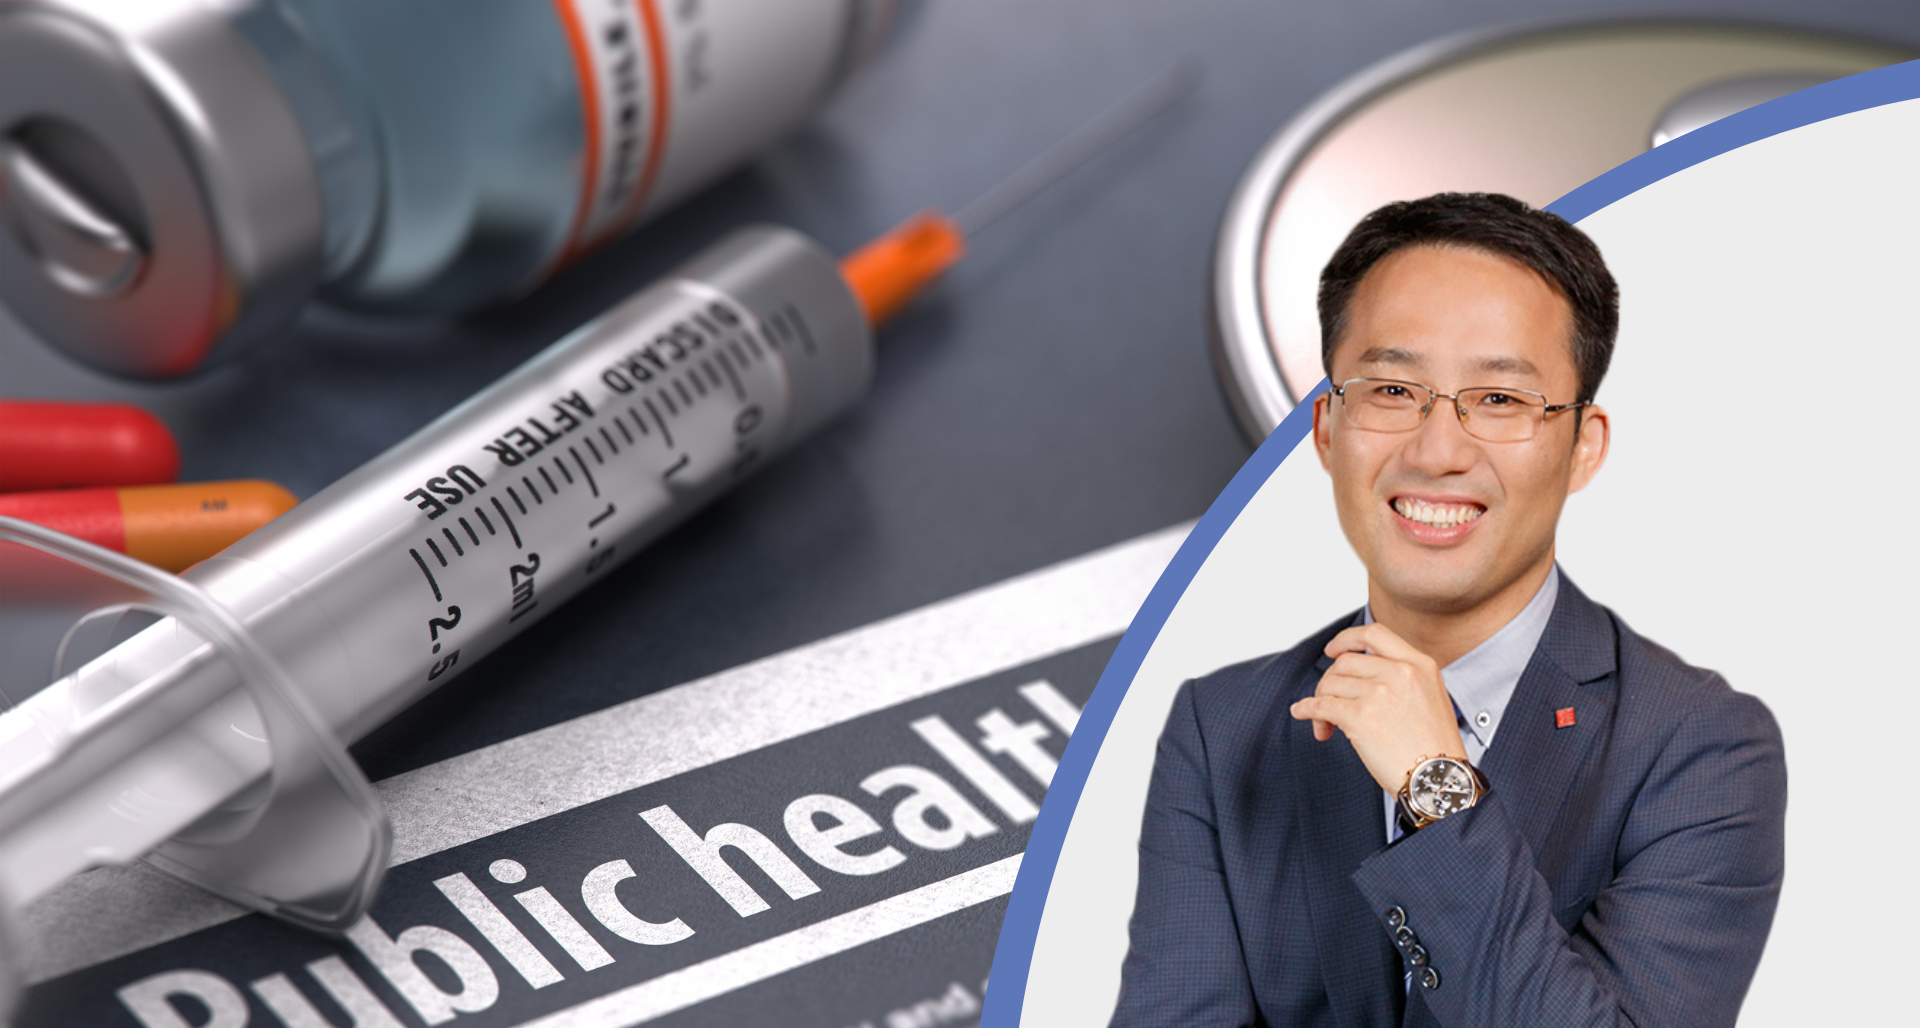 EdUHK Policy Research Informed Health Care Reform in Mainland China and Hong Kong